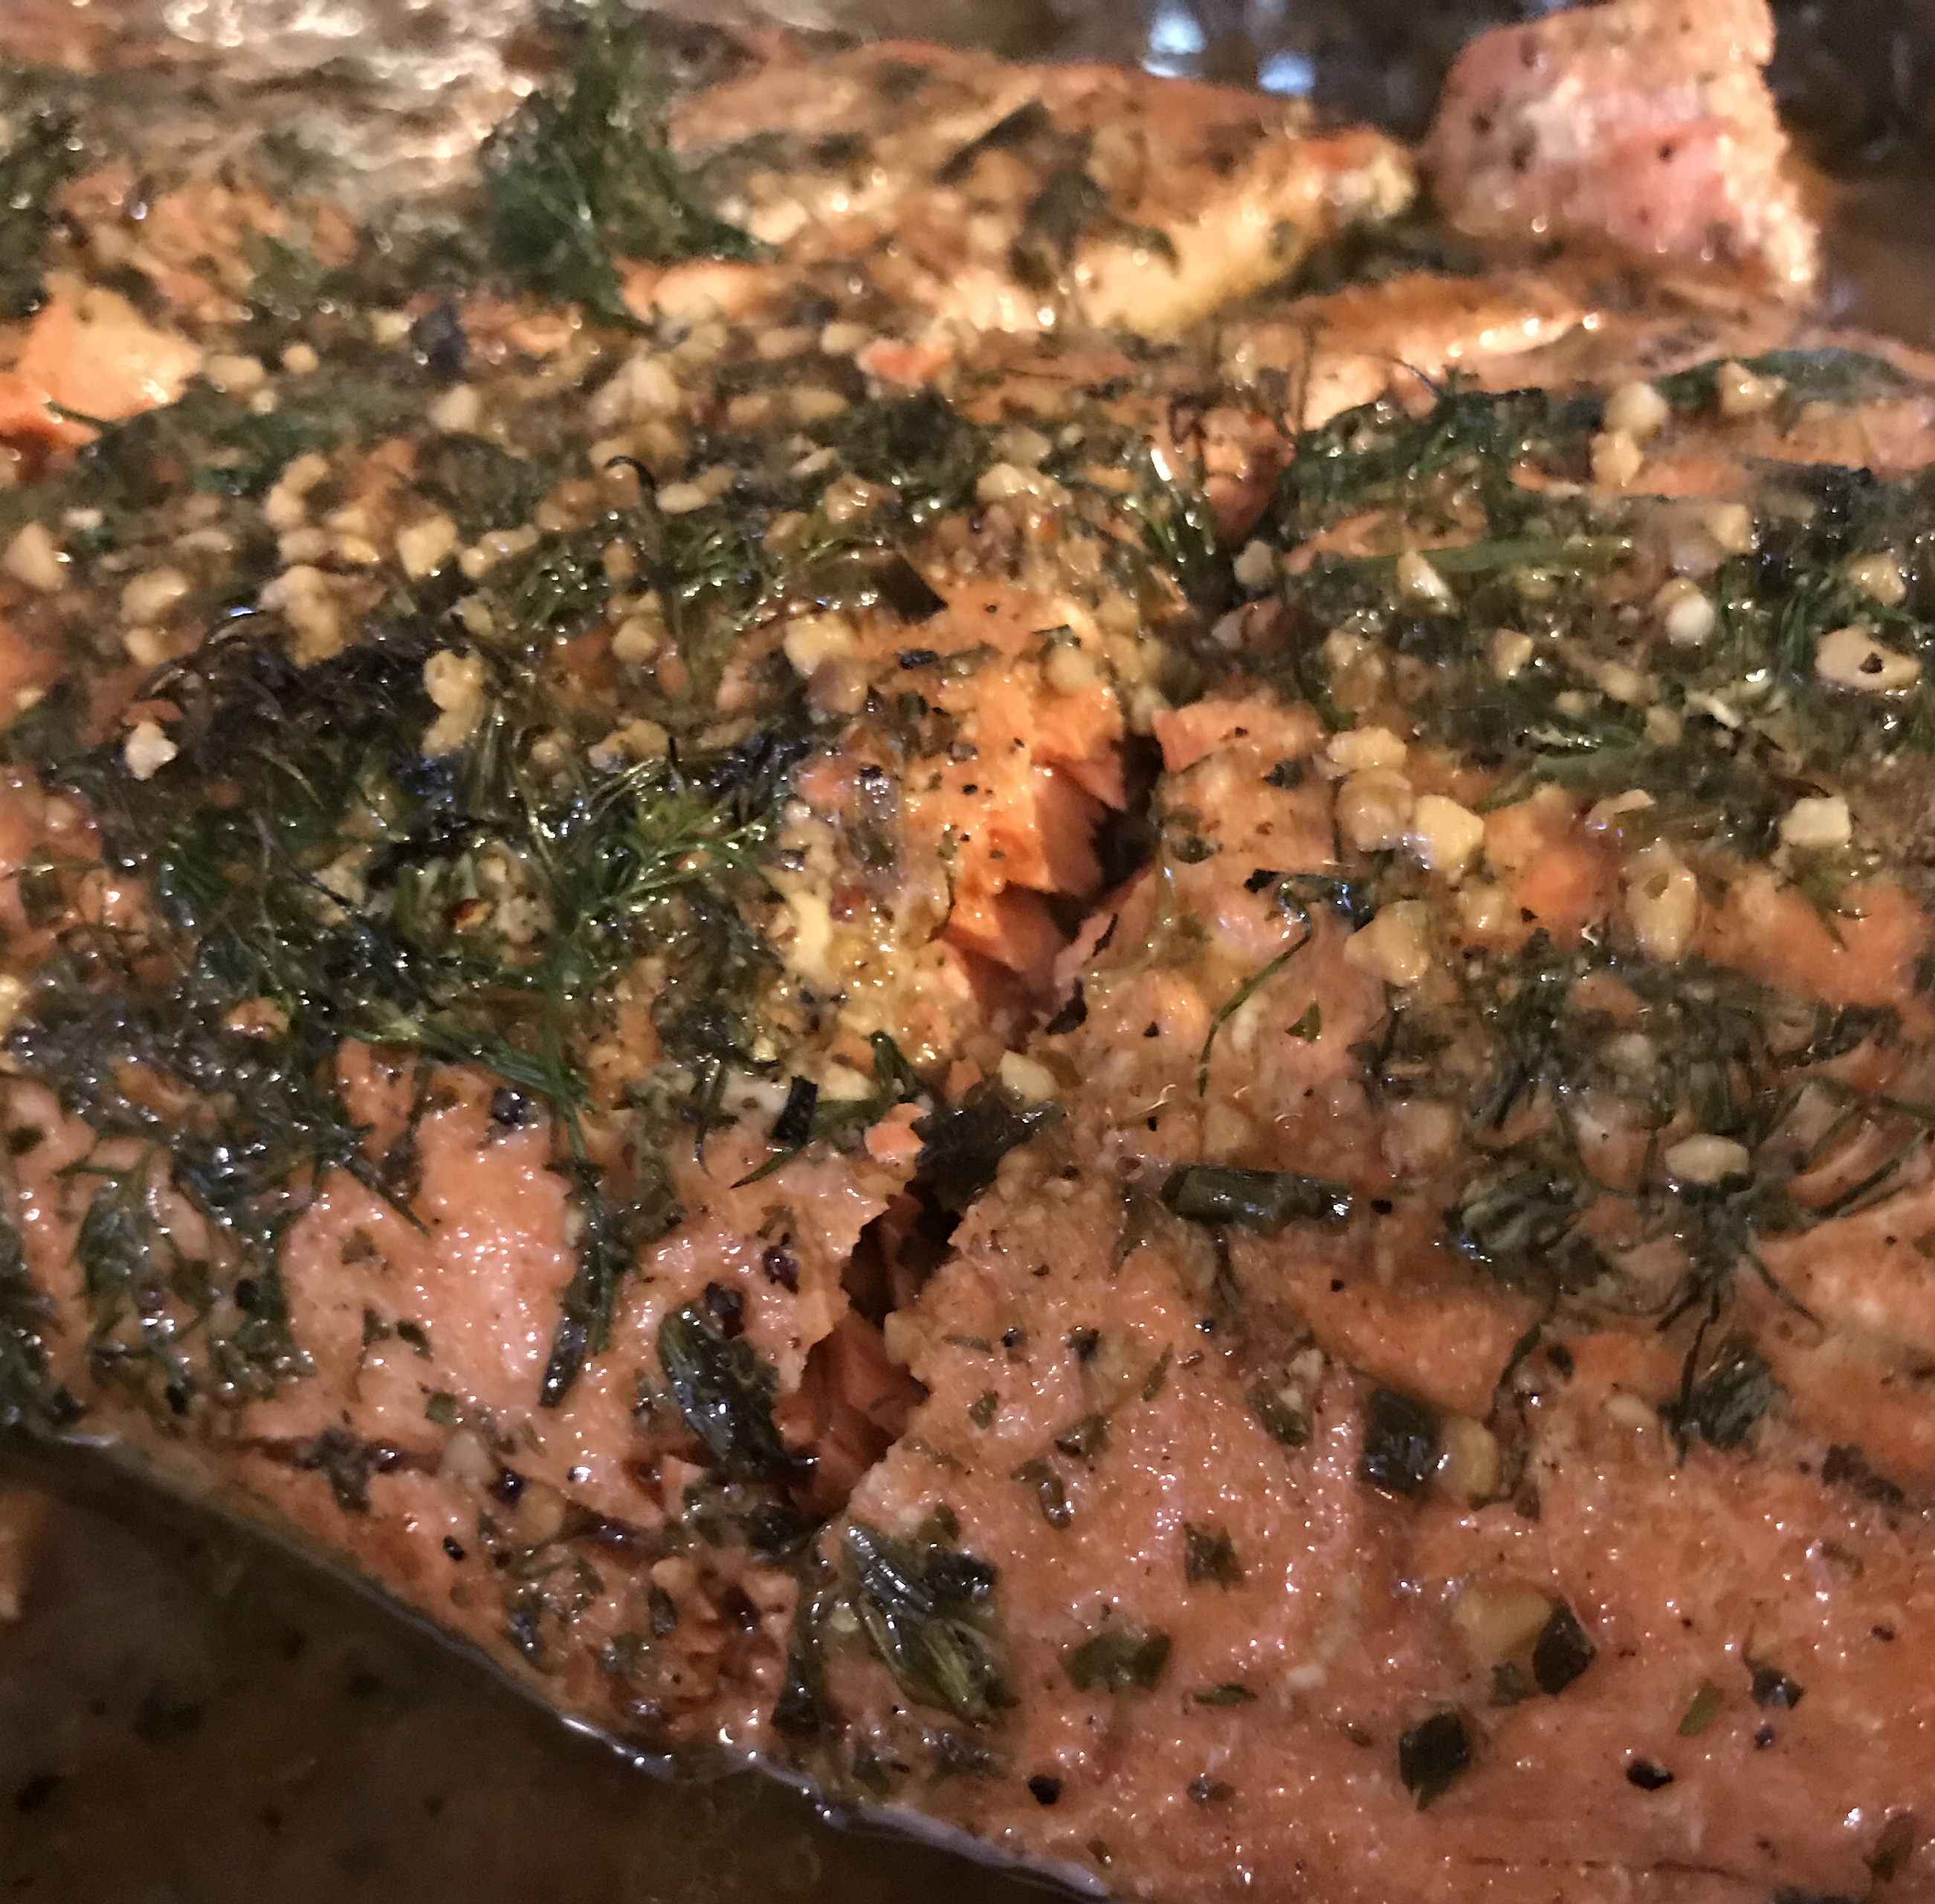 Melt-in-Your-Mouth Broiled Salmon 